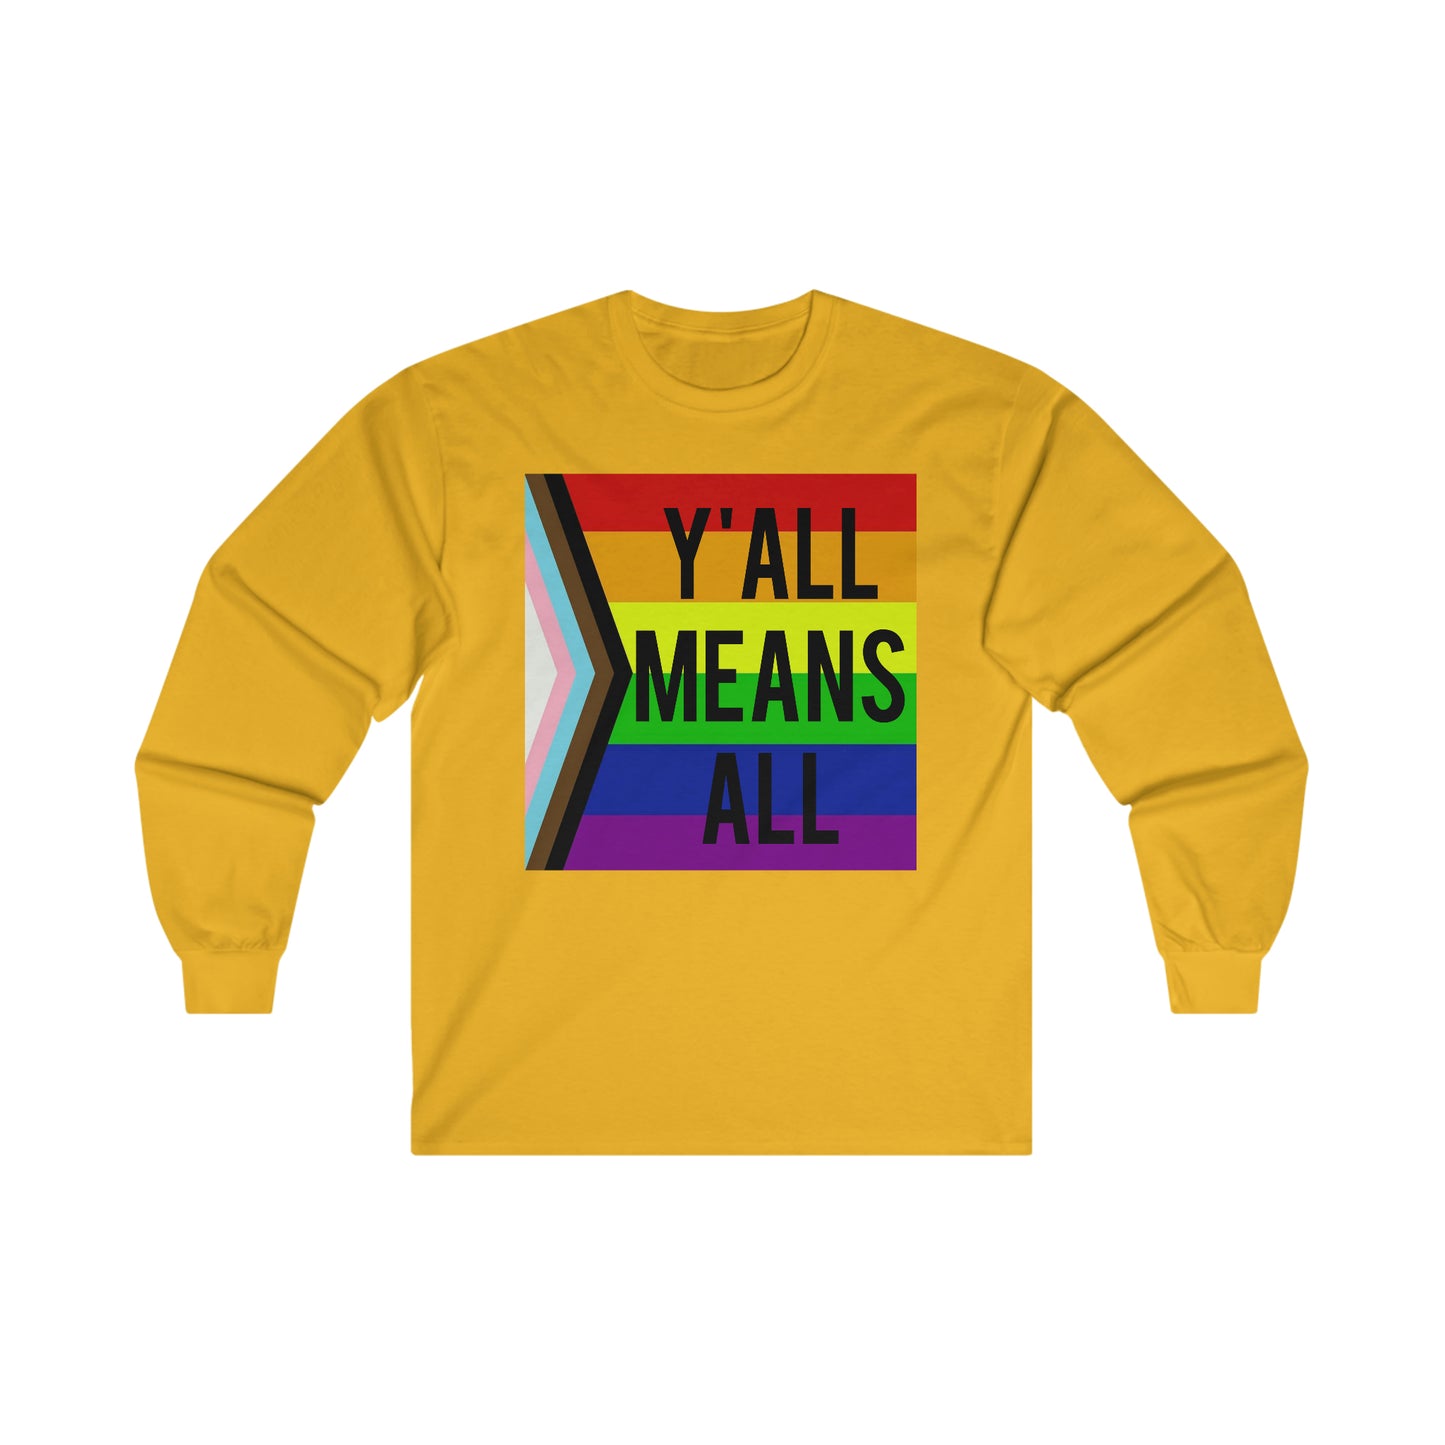 Y'ALL MEANS ALL LGBTQ Pride Adult Long Sleeve T-Shirt